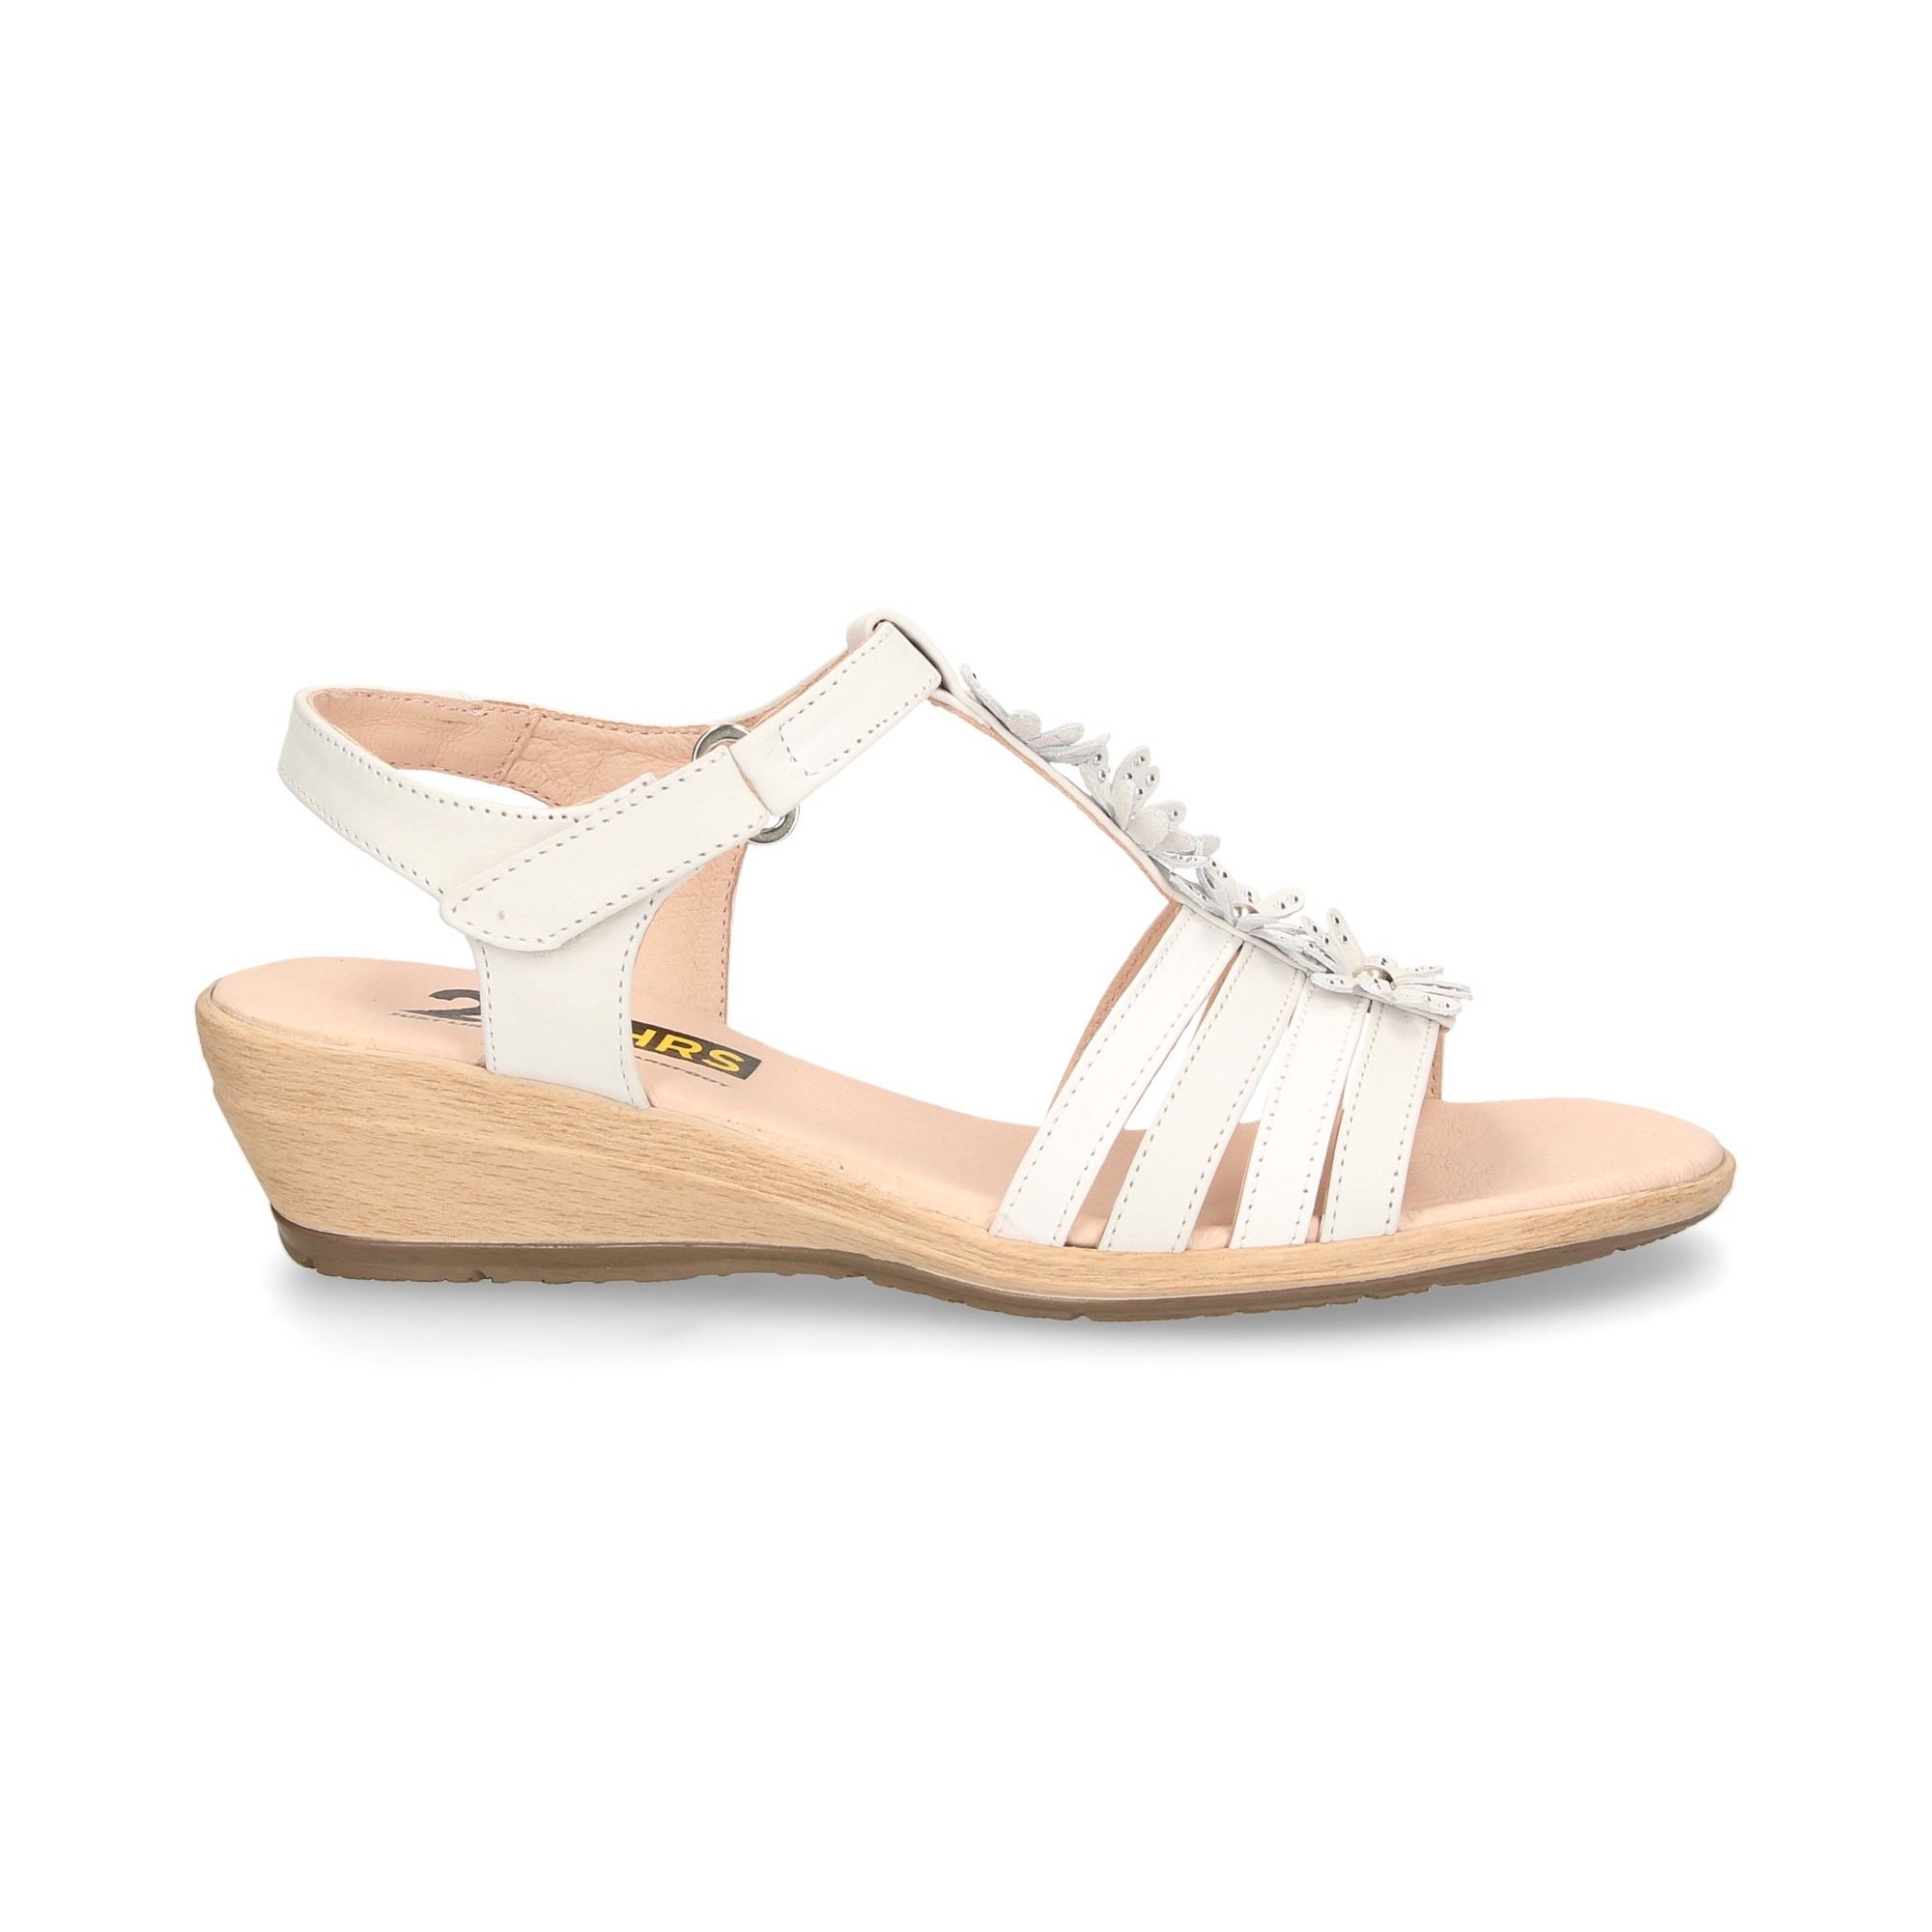 t-wedge-sandal-flowers-white-leather